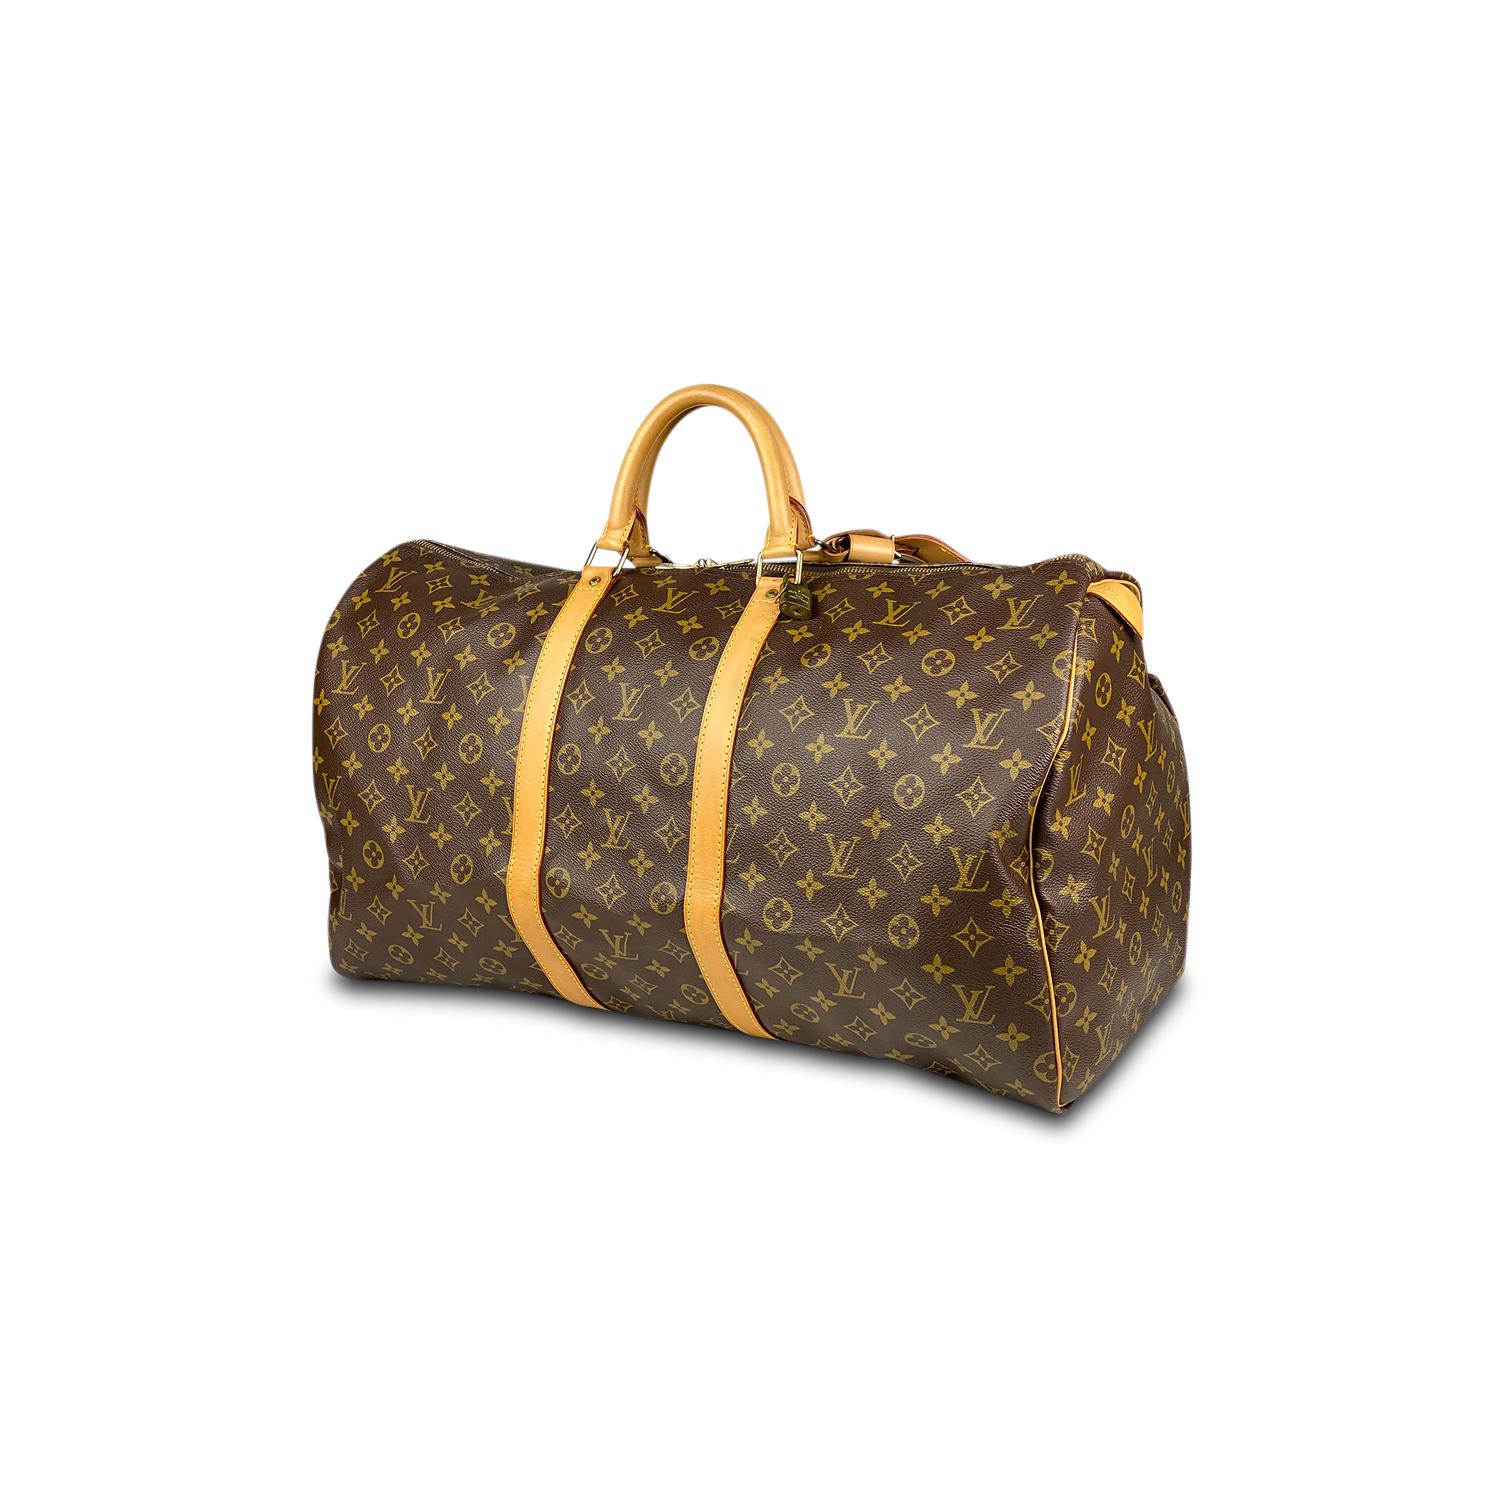 Louis Vuitton Monogram Keepall 55 In Good Condition For Sale In Sundbyberg, SE